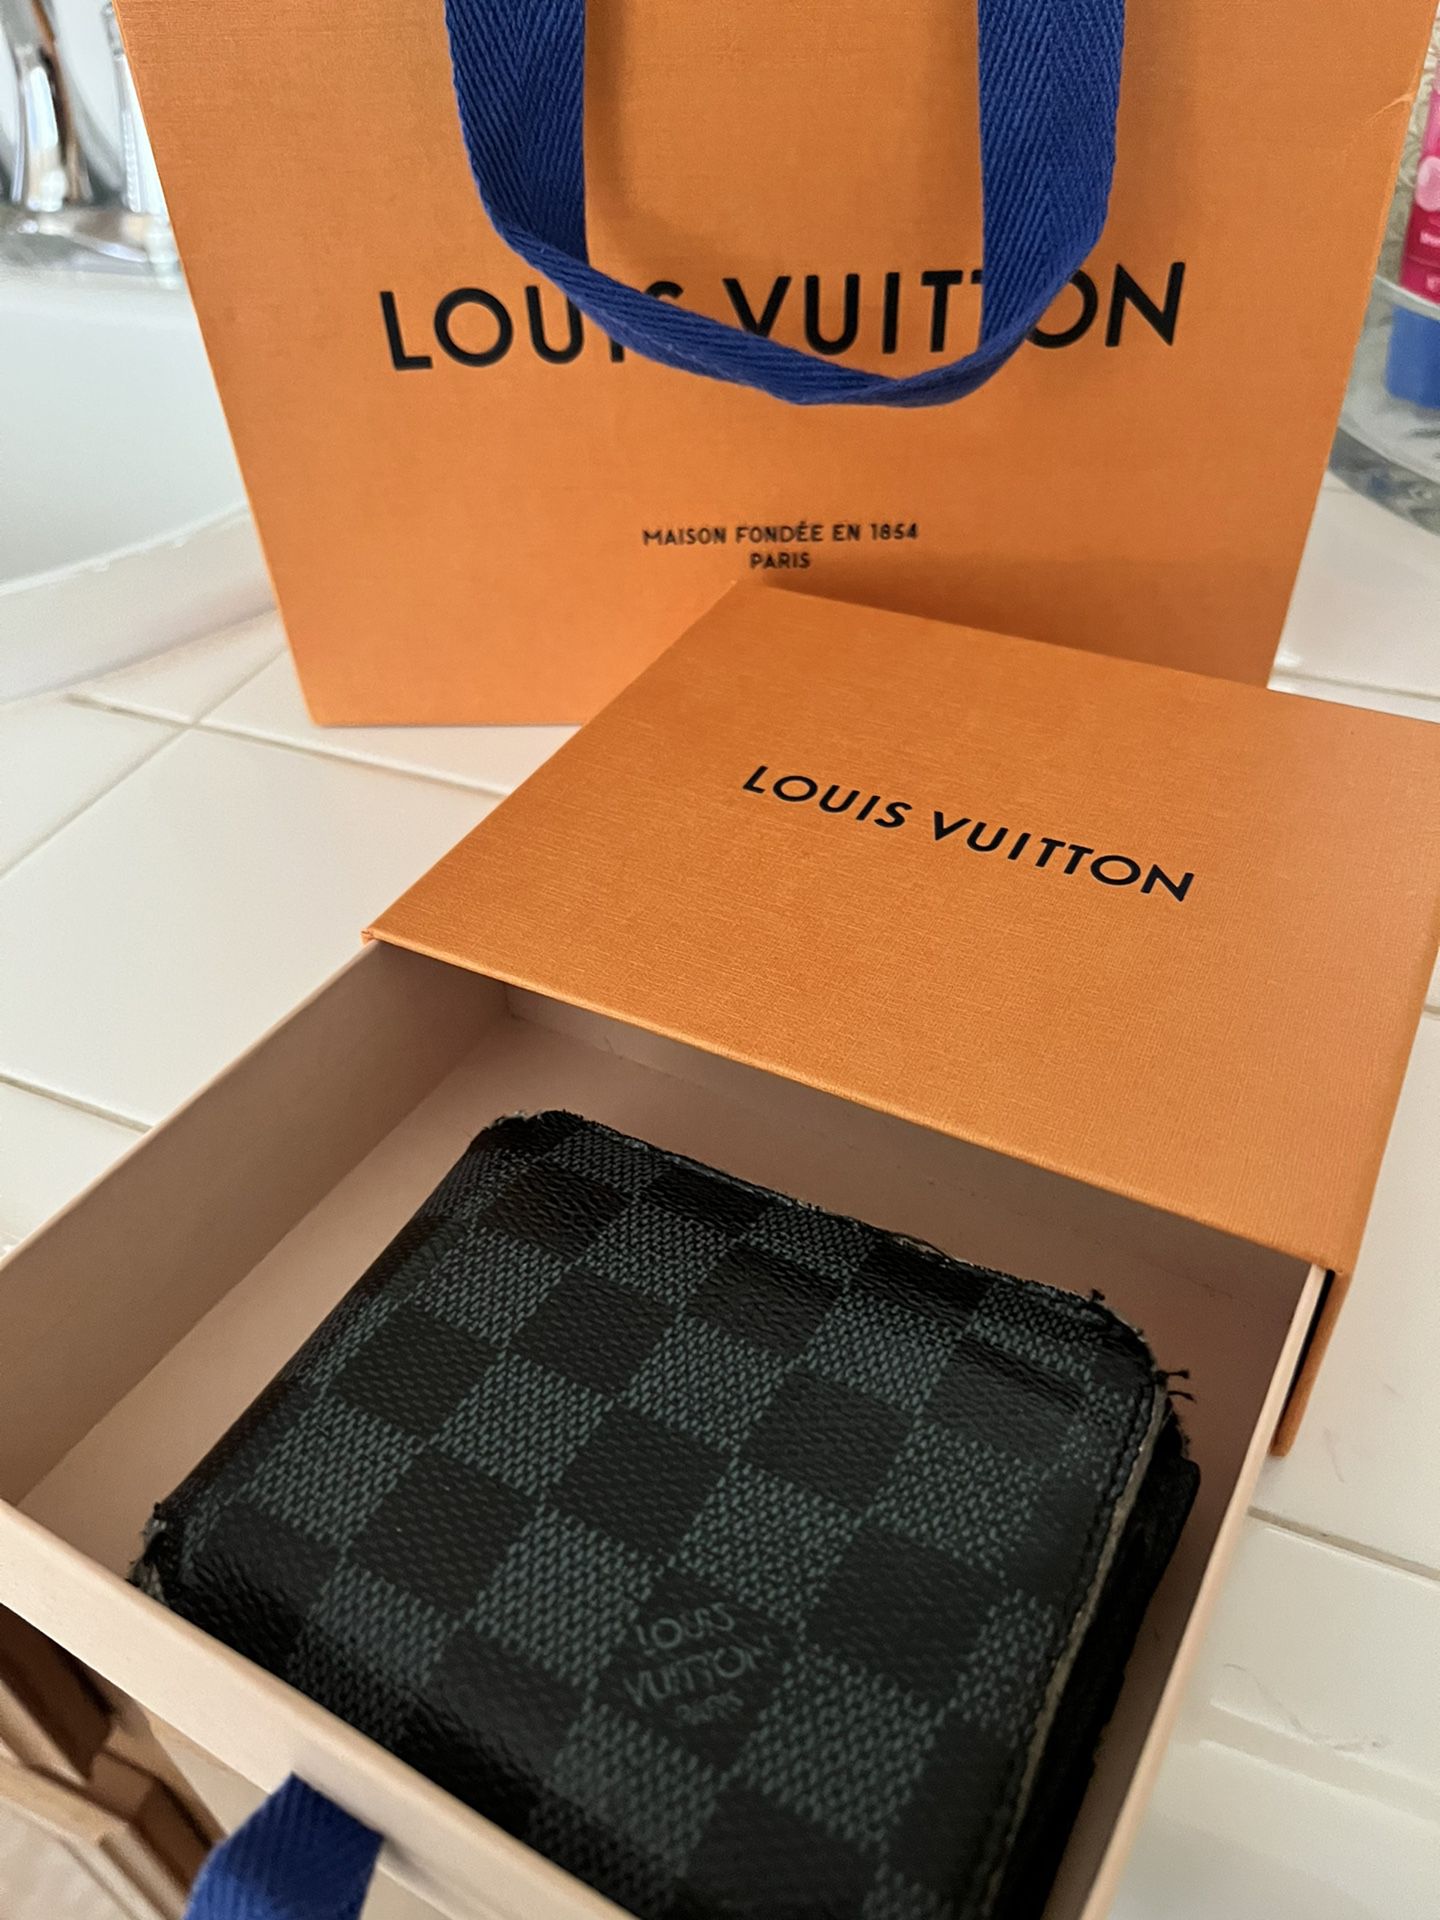 Louis Vuitton Key Chain/card Holder for Sale in Palmdale, CA - OfferUp